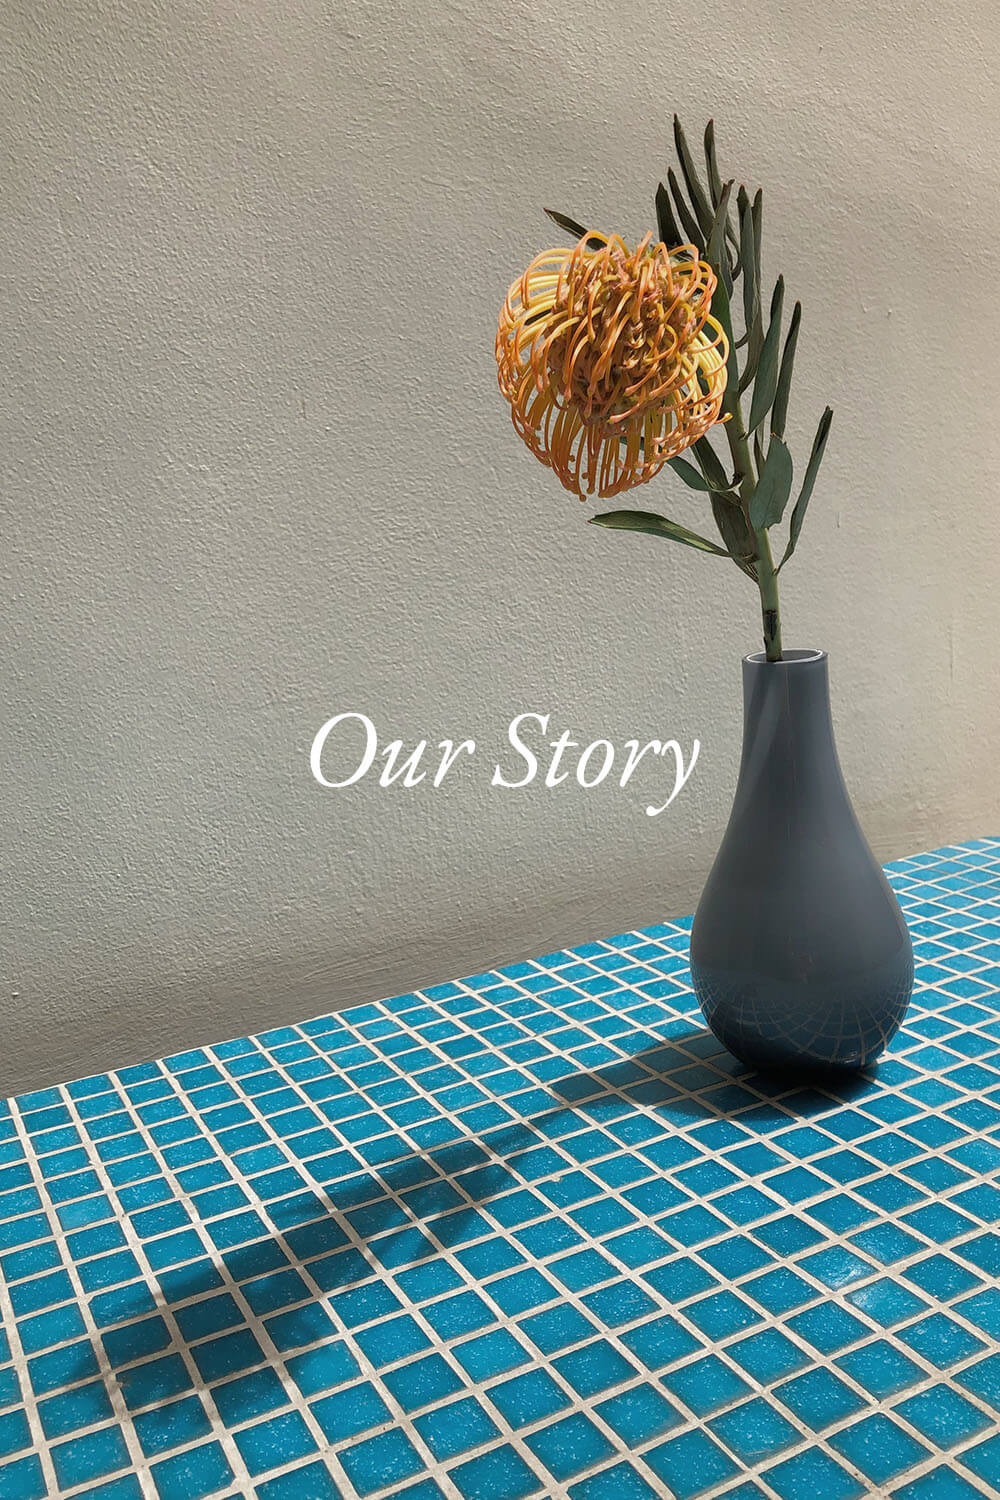 Anika 4 – Our Story